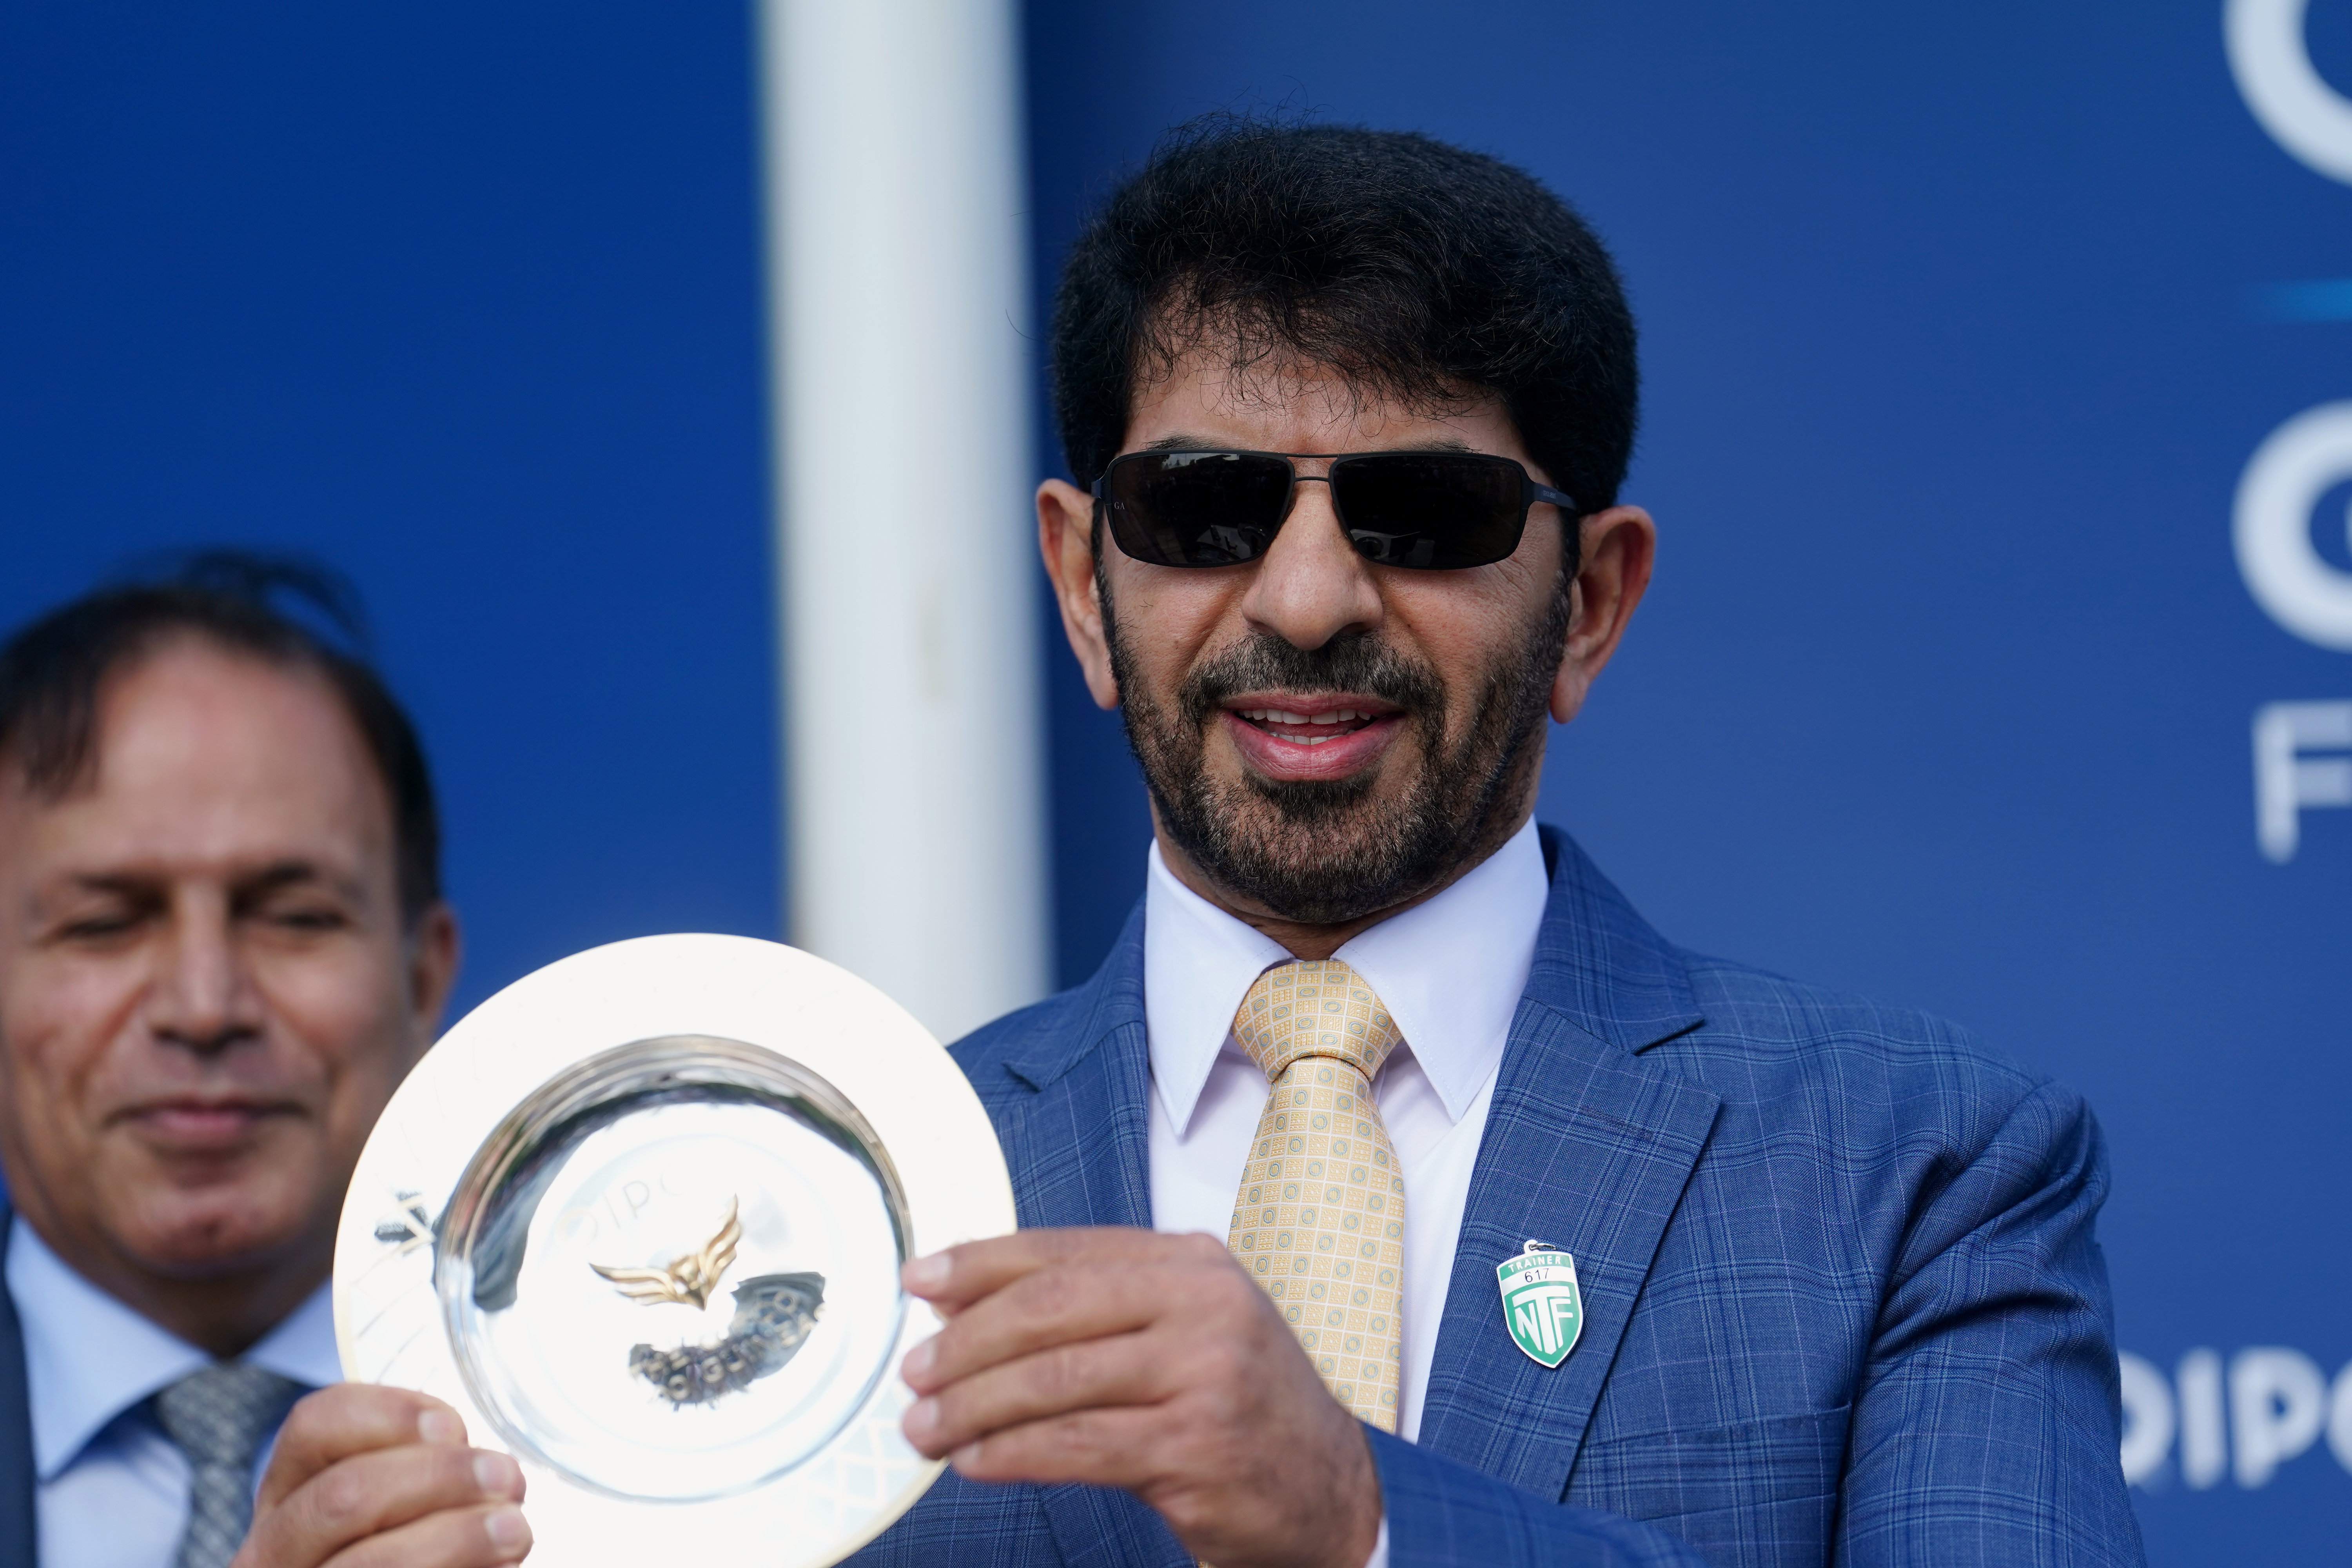 Winning the 1000 Guineas again meant a lot to Saeed bin Suroor